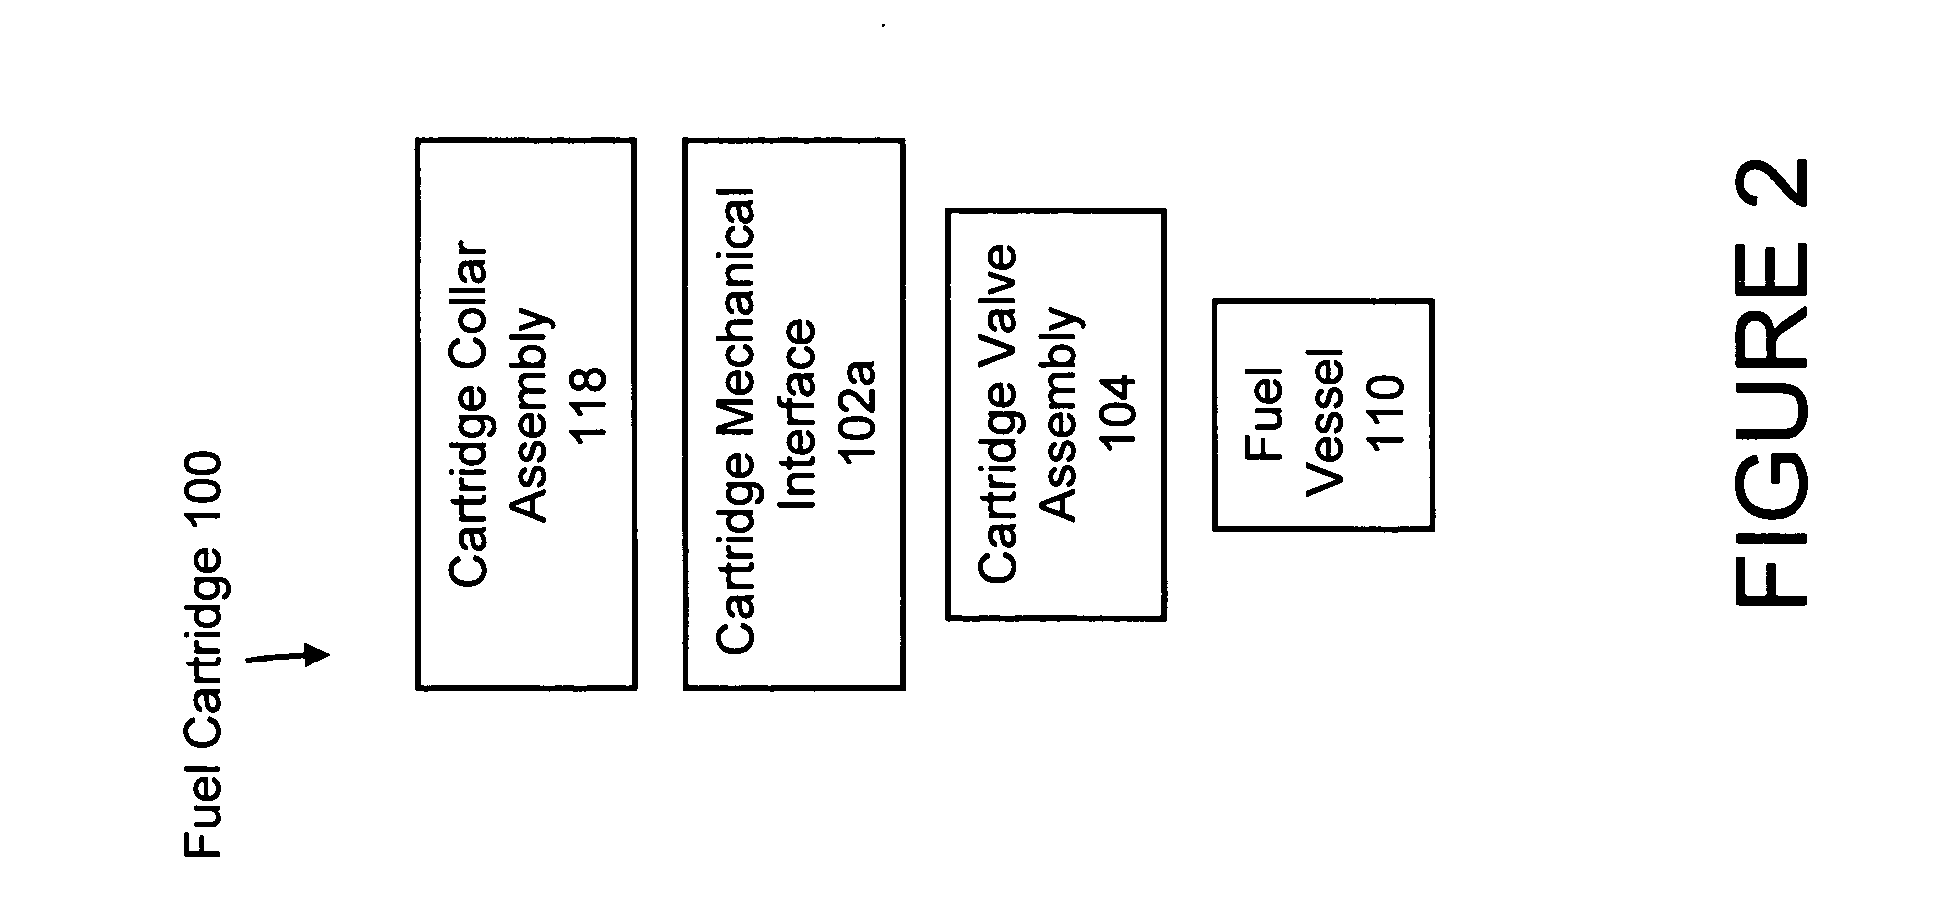 Fuel cell power and management system, and technique for controlling and/or operating same